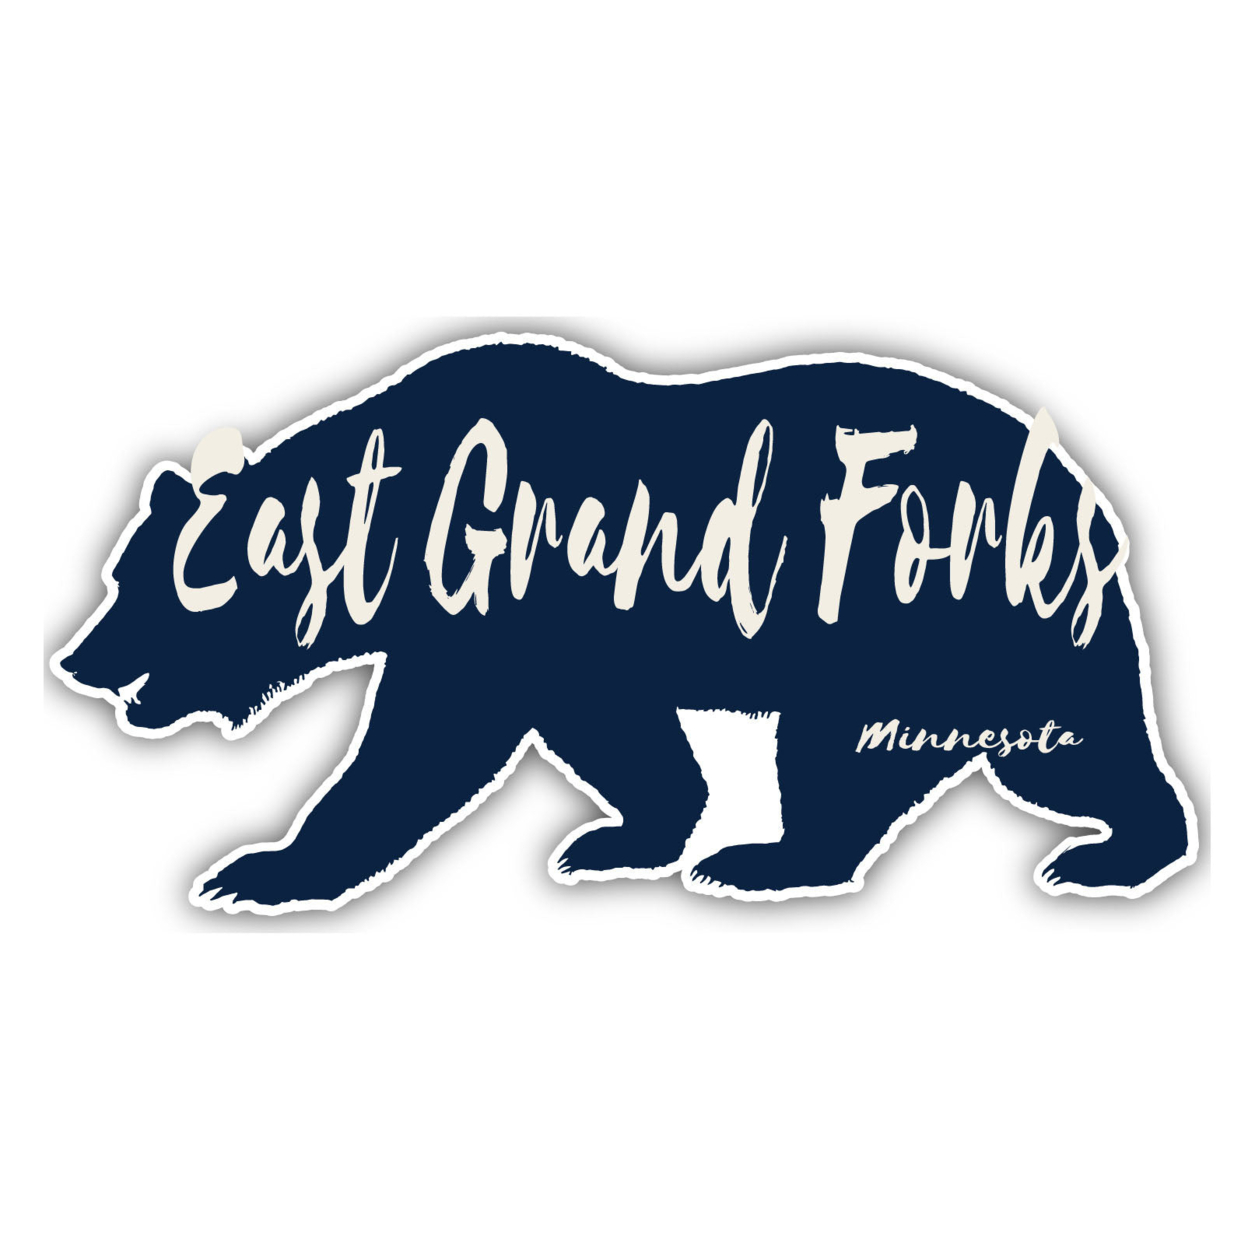 East Grand Forks Minnesota Souvenir Decorative Stickers (Choose Theme And Size) - 4-Pack, 2-Inch, Camp Life